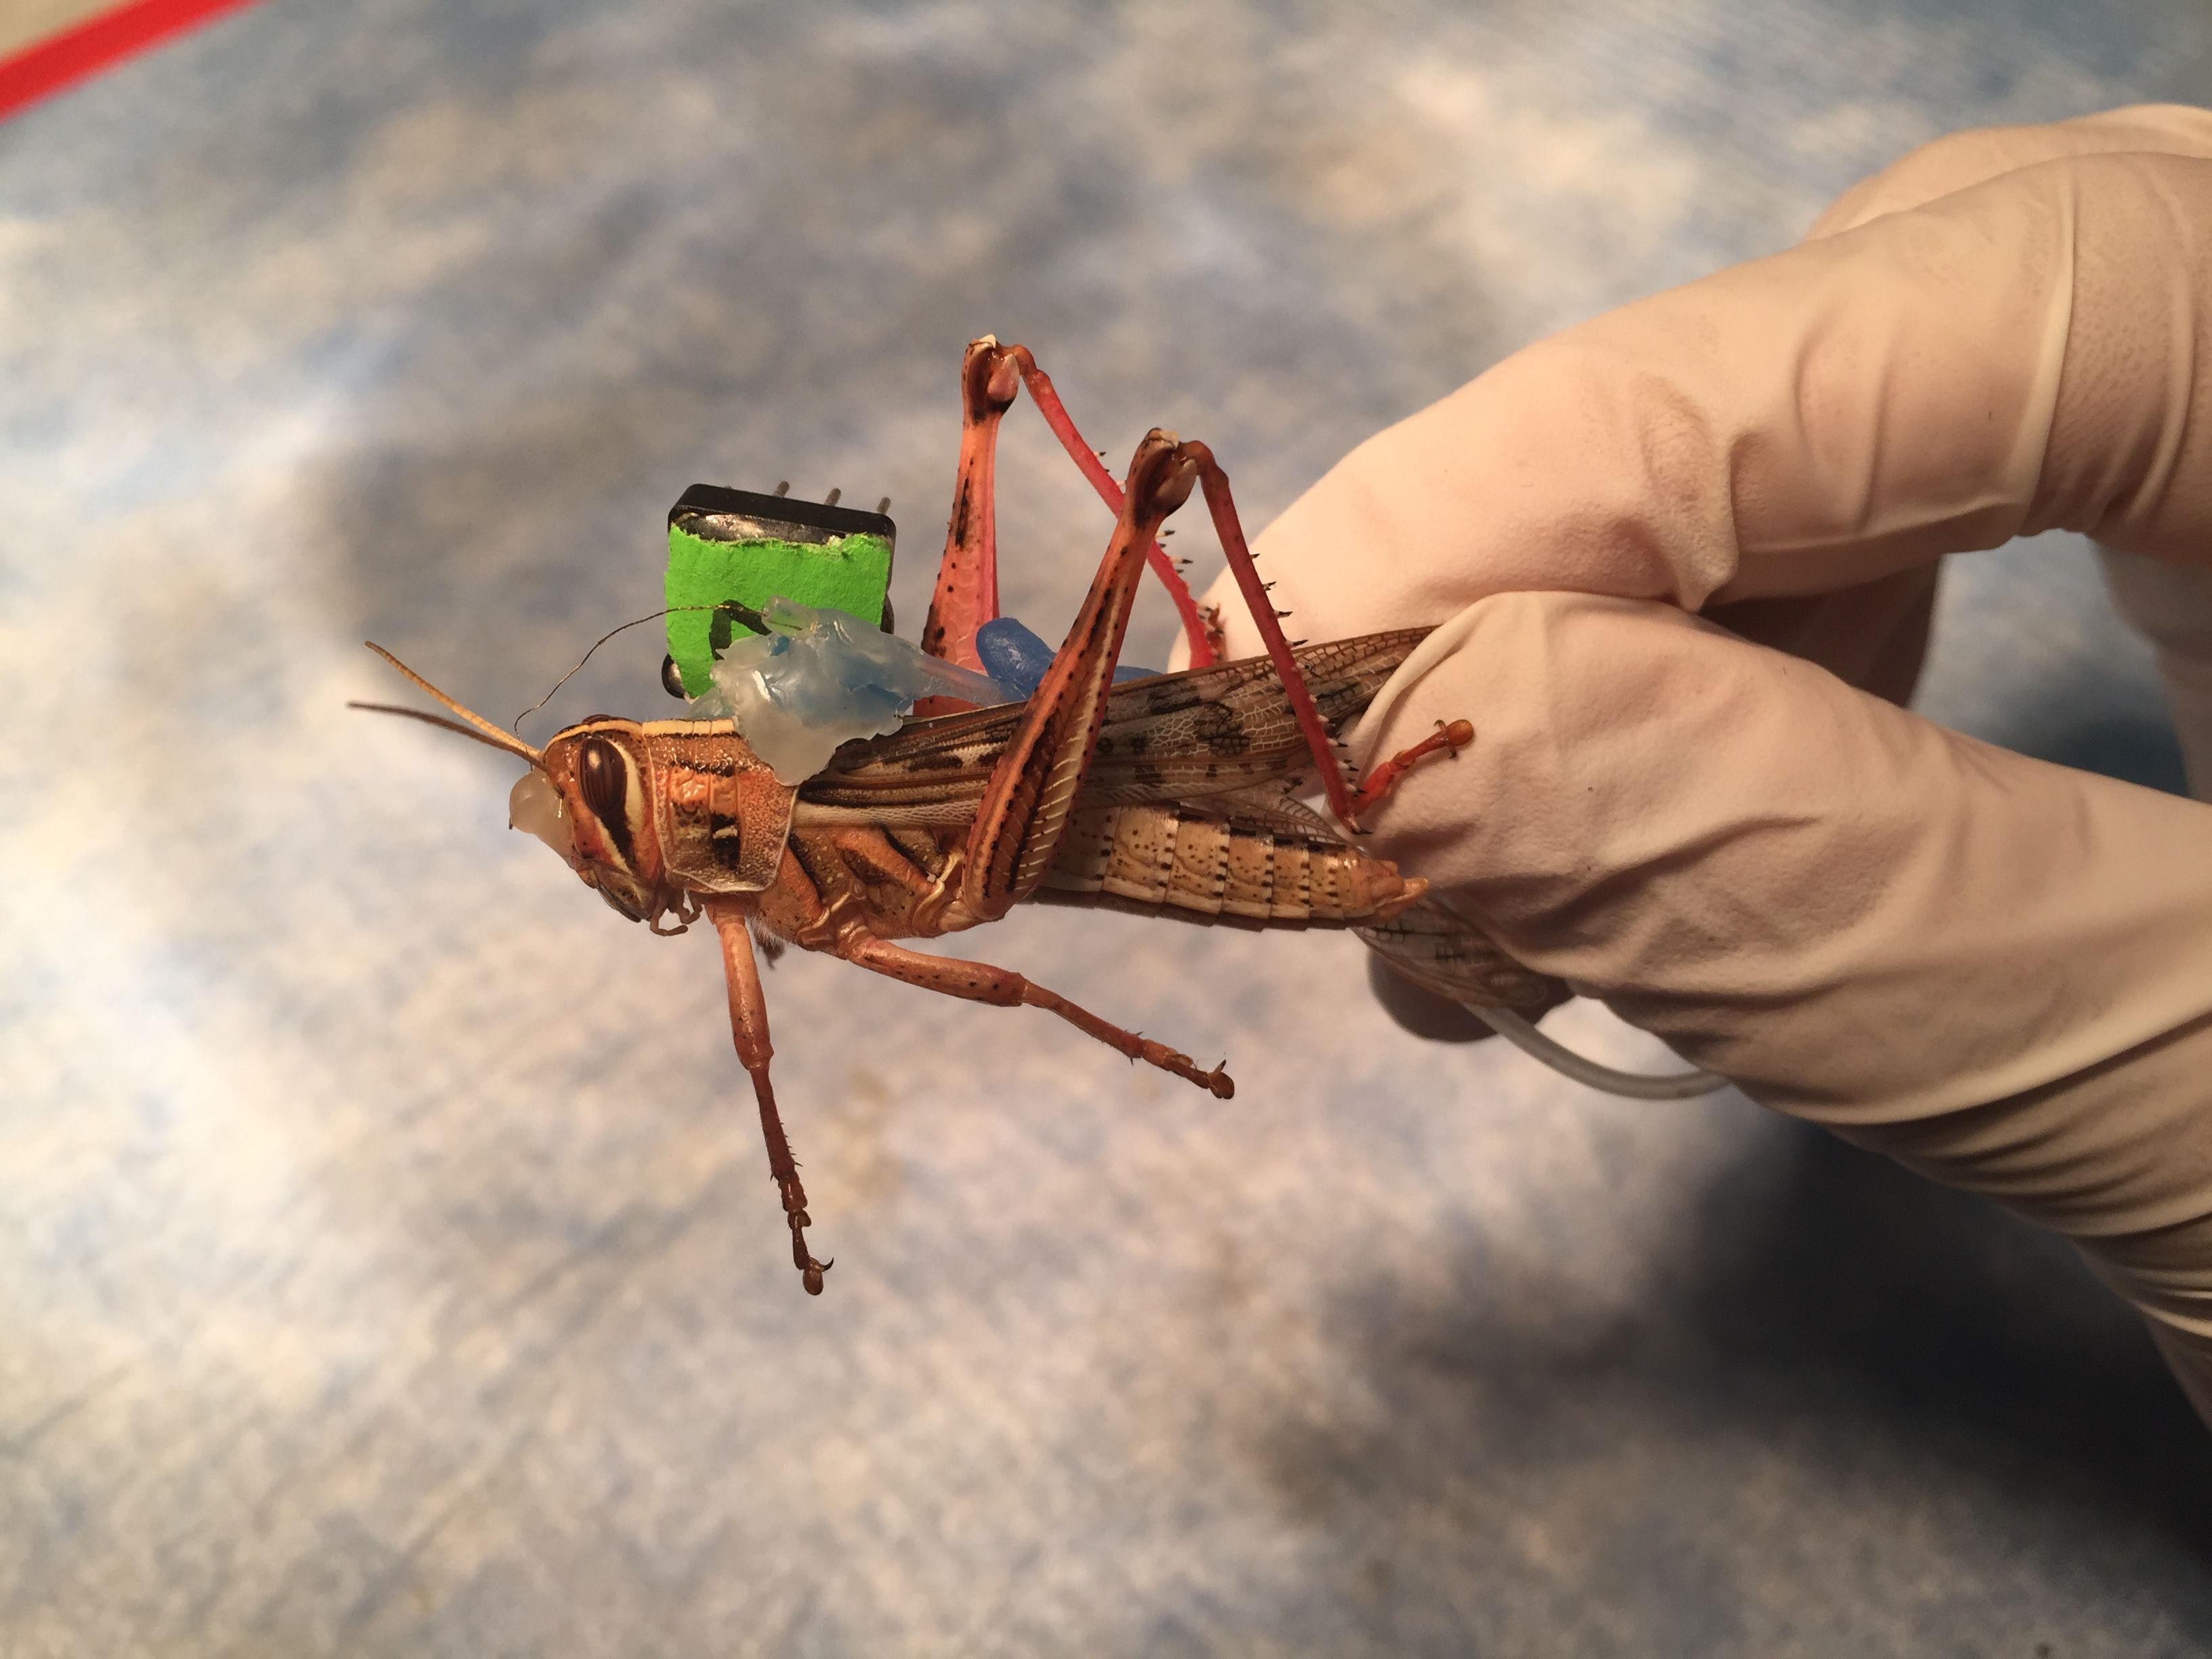 The US navy expects to have bomb-sniffing locusts within a year — Quartz